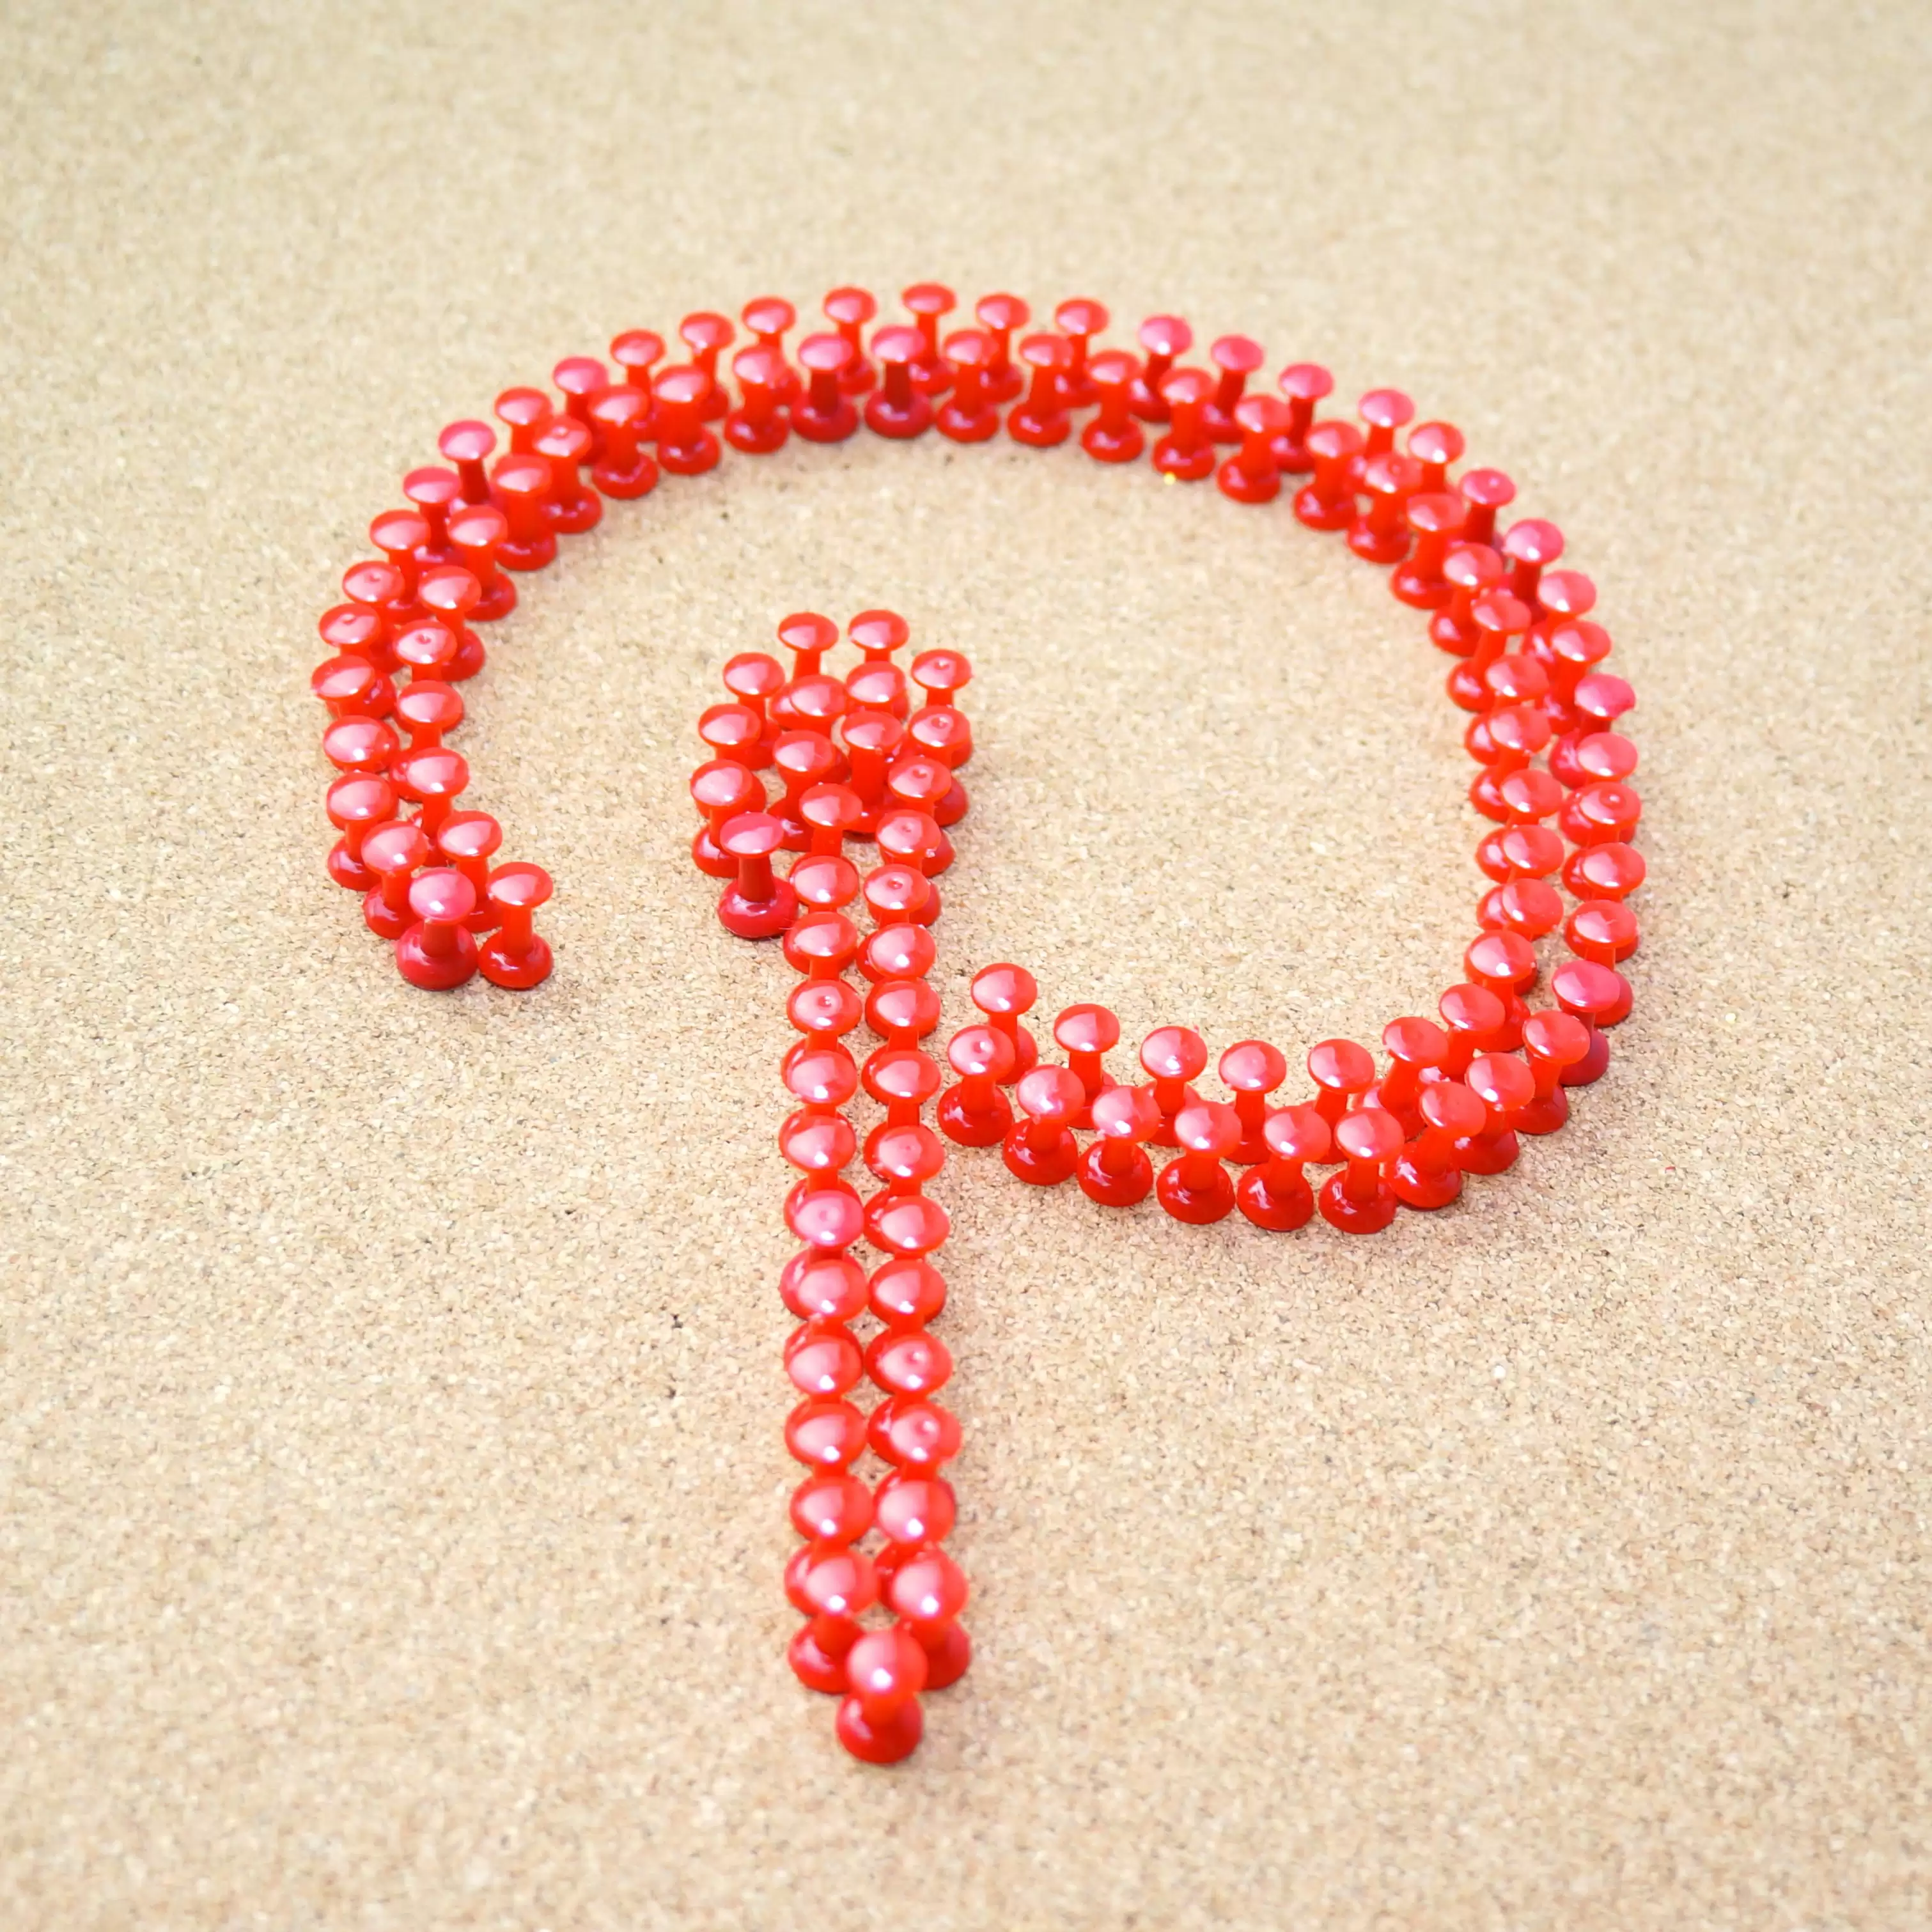 Pinterest Logo made of red pins on a neutral coloured background